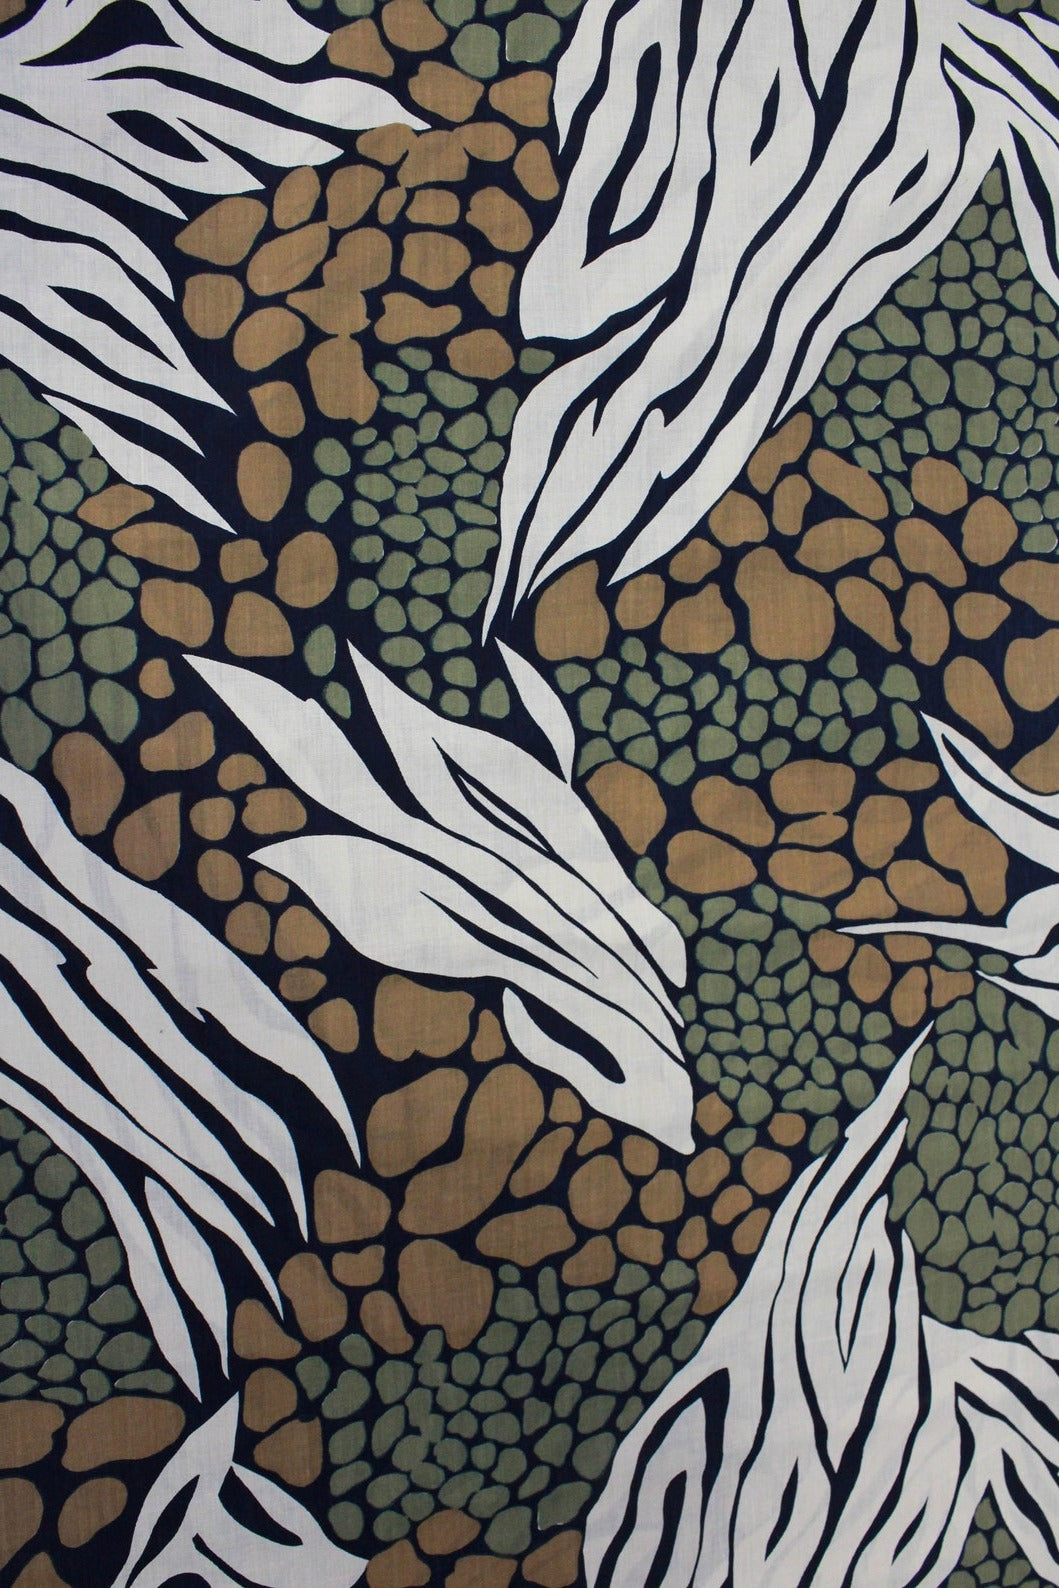 1970s Abstract Print Cotton Fabric, Earth Tones Organic Shape Printed Sewing Fabric, 3.9 Yards, Vintage 70s Sewing Fabric